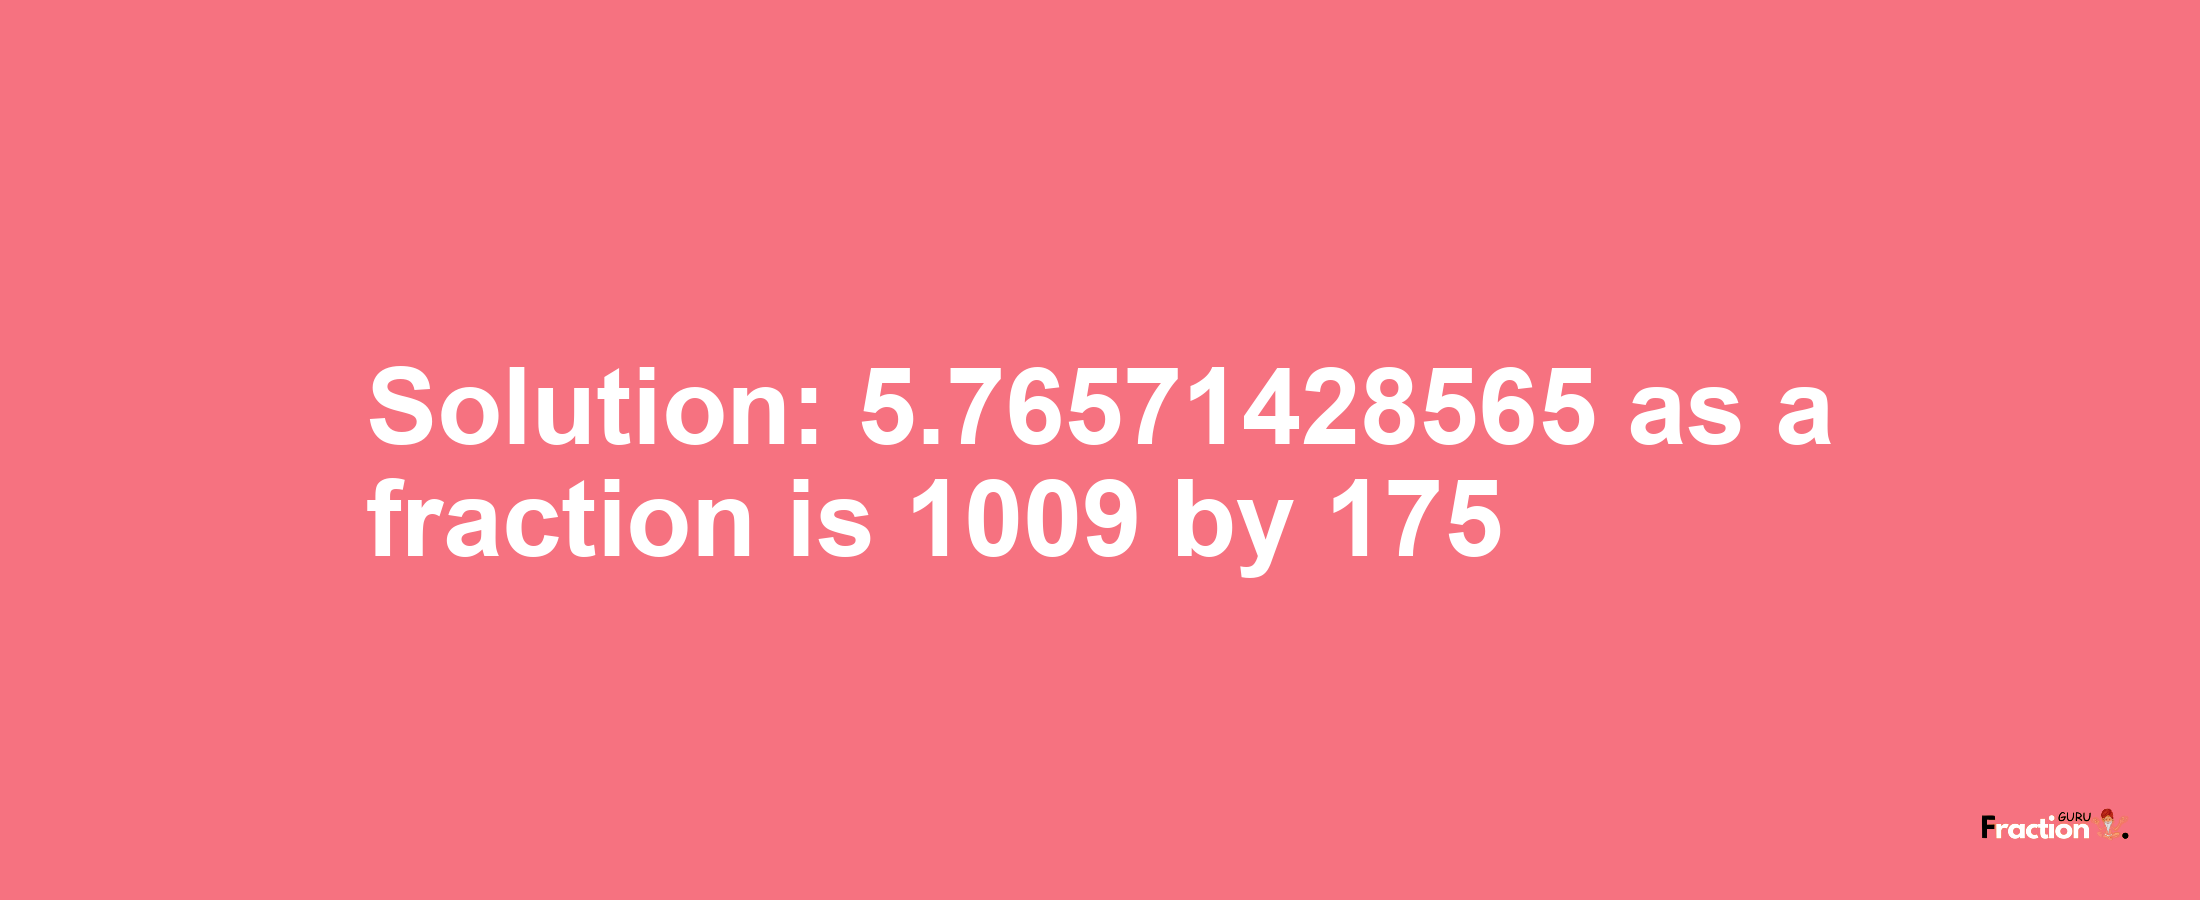 Solution:5.76571428565 as a fraction is 1009/175